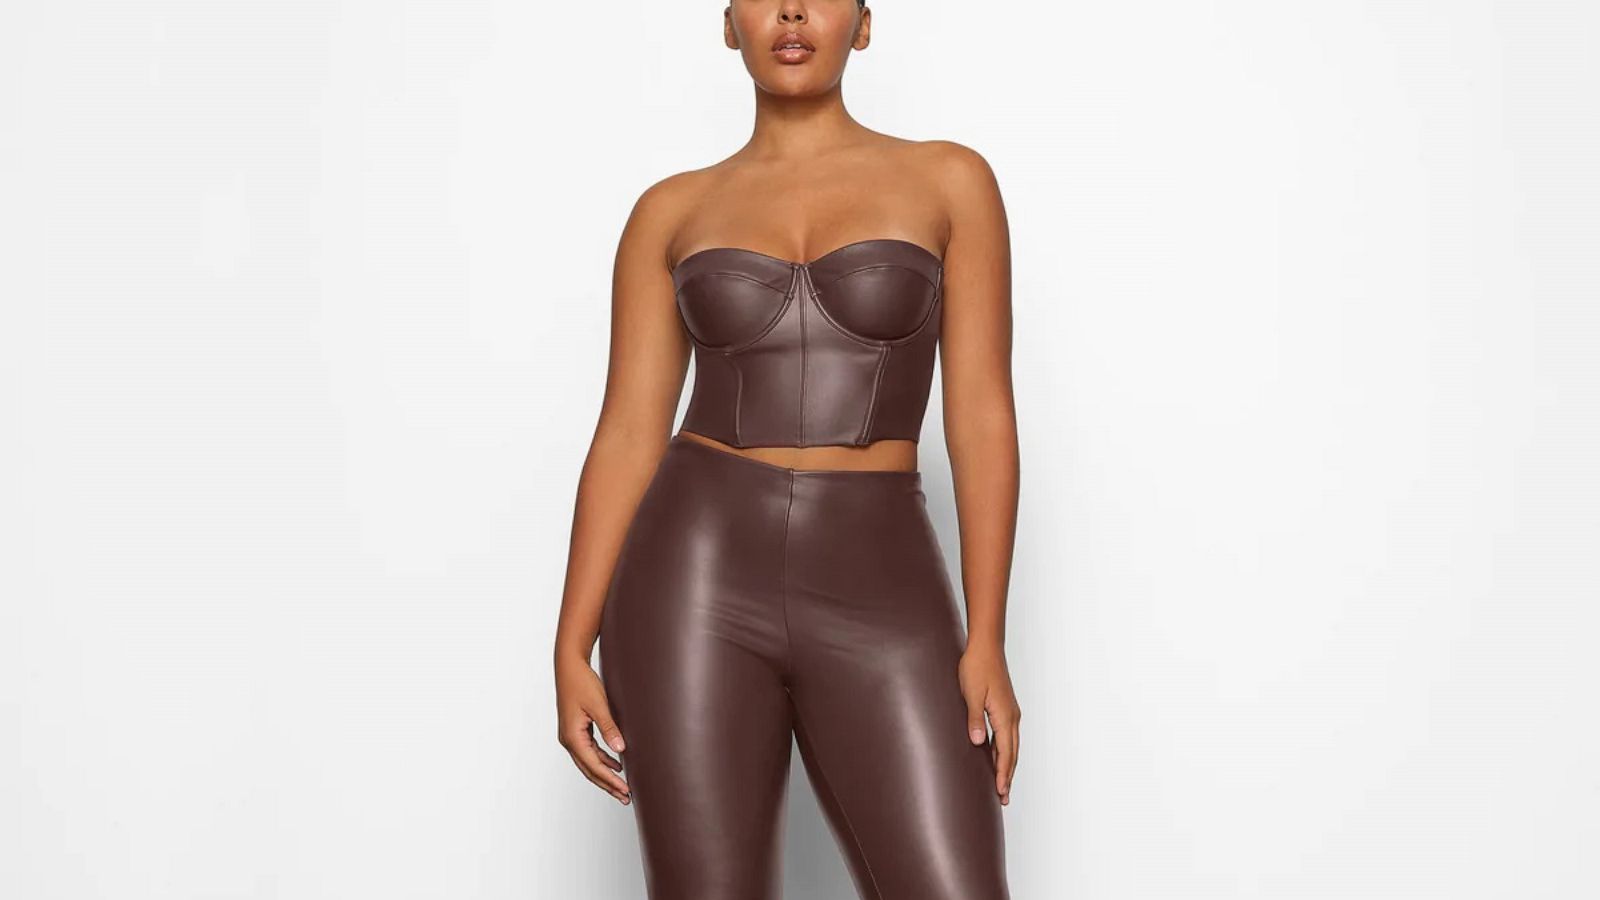 Kim Kardashian's Skims drops faux leather collection featuring leggings,  corsets and more - Good Morning America